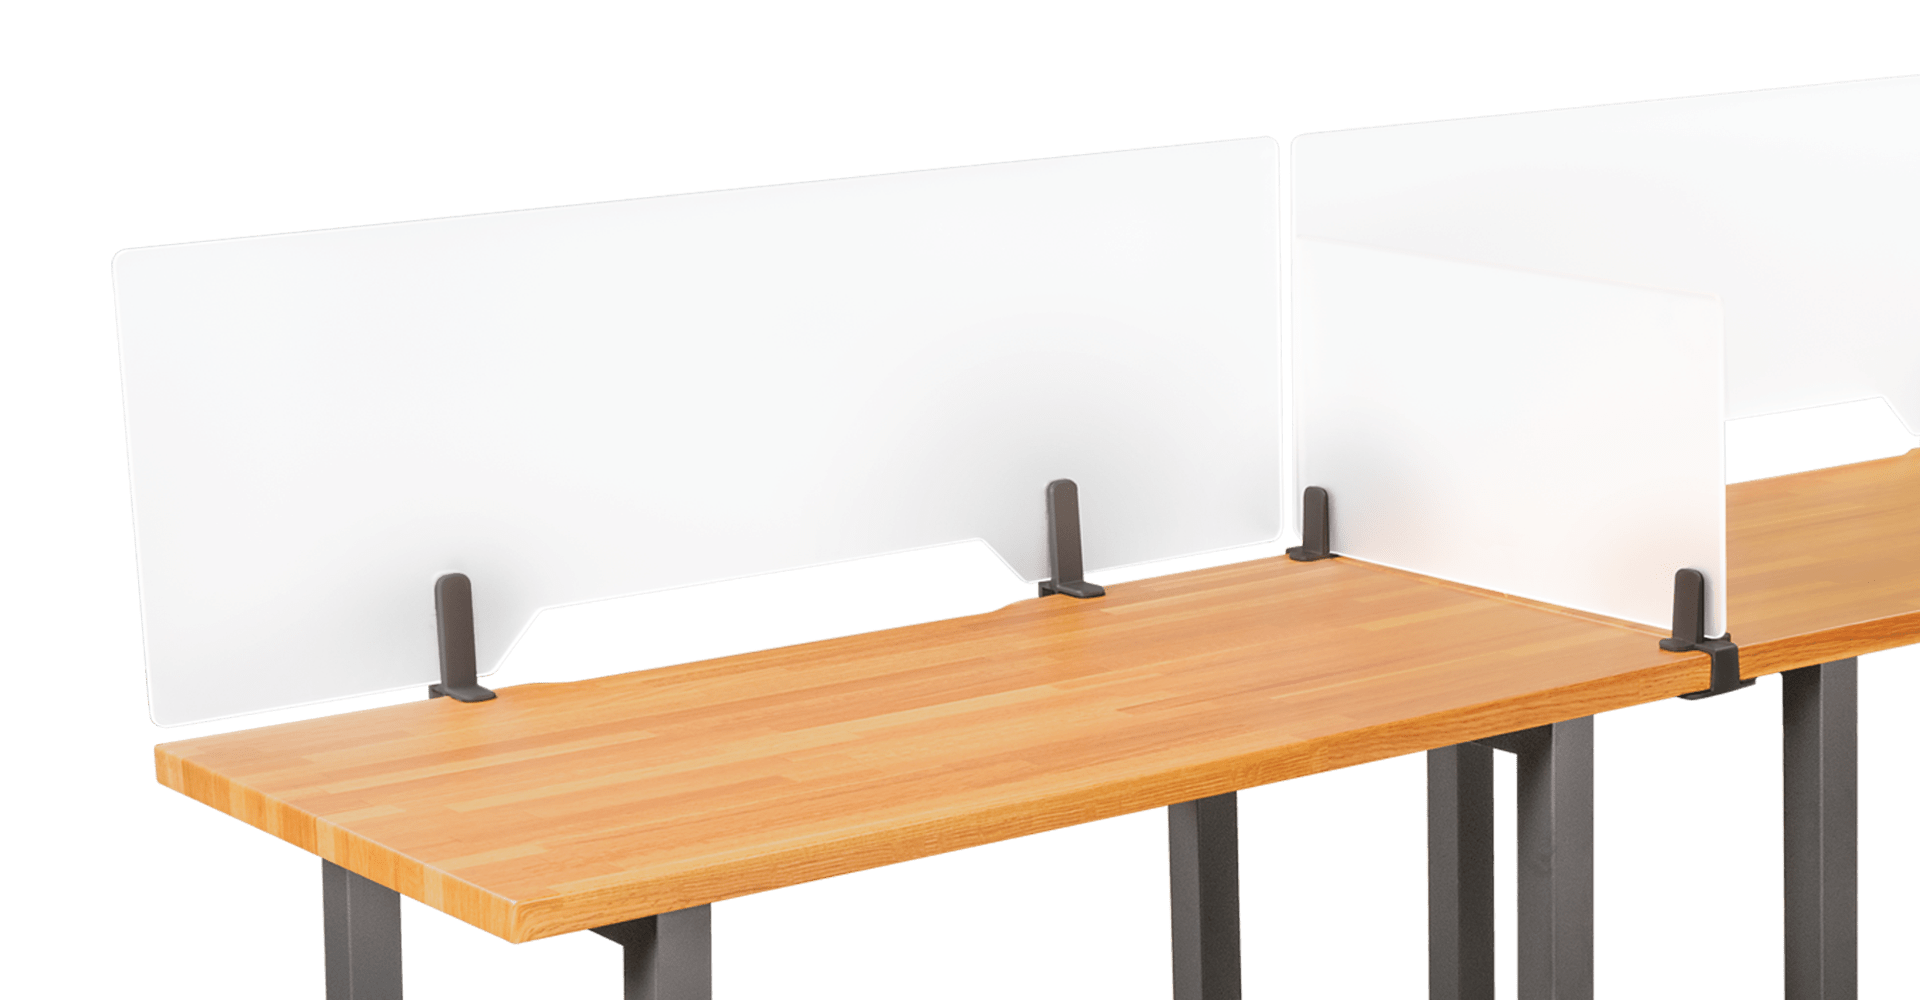 privacy panels both along the length and depth of the desk